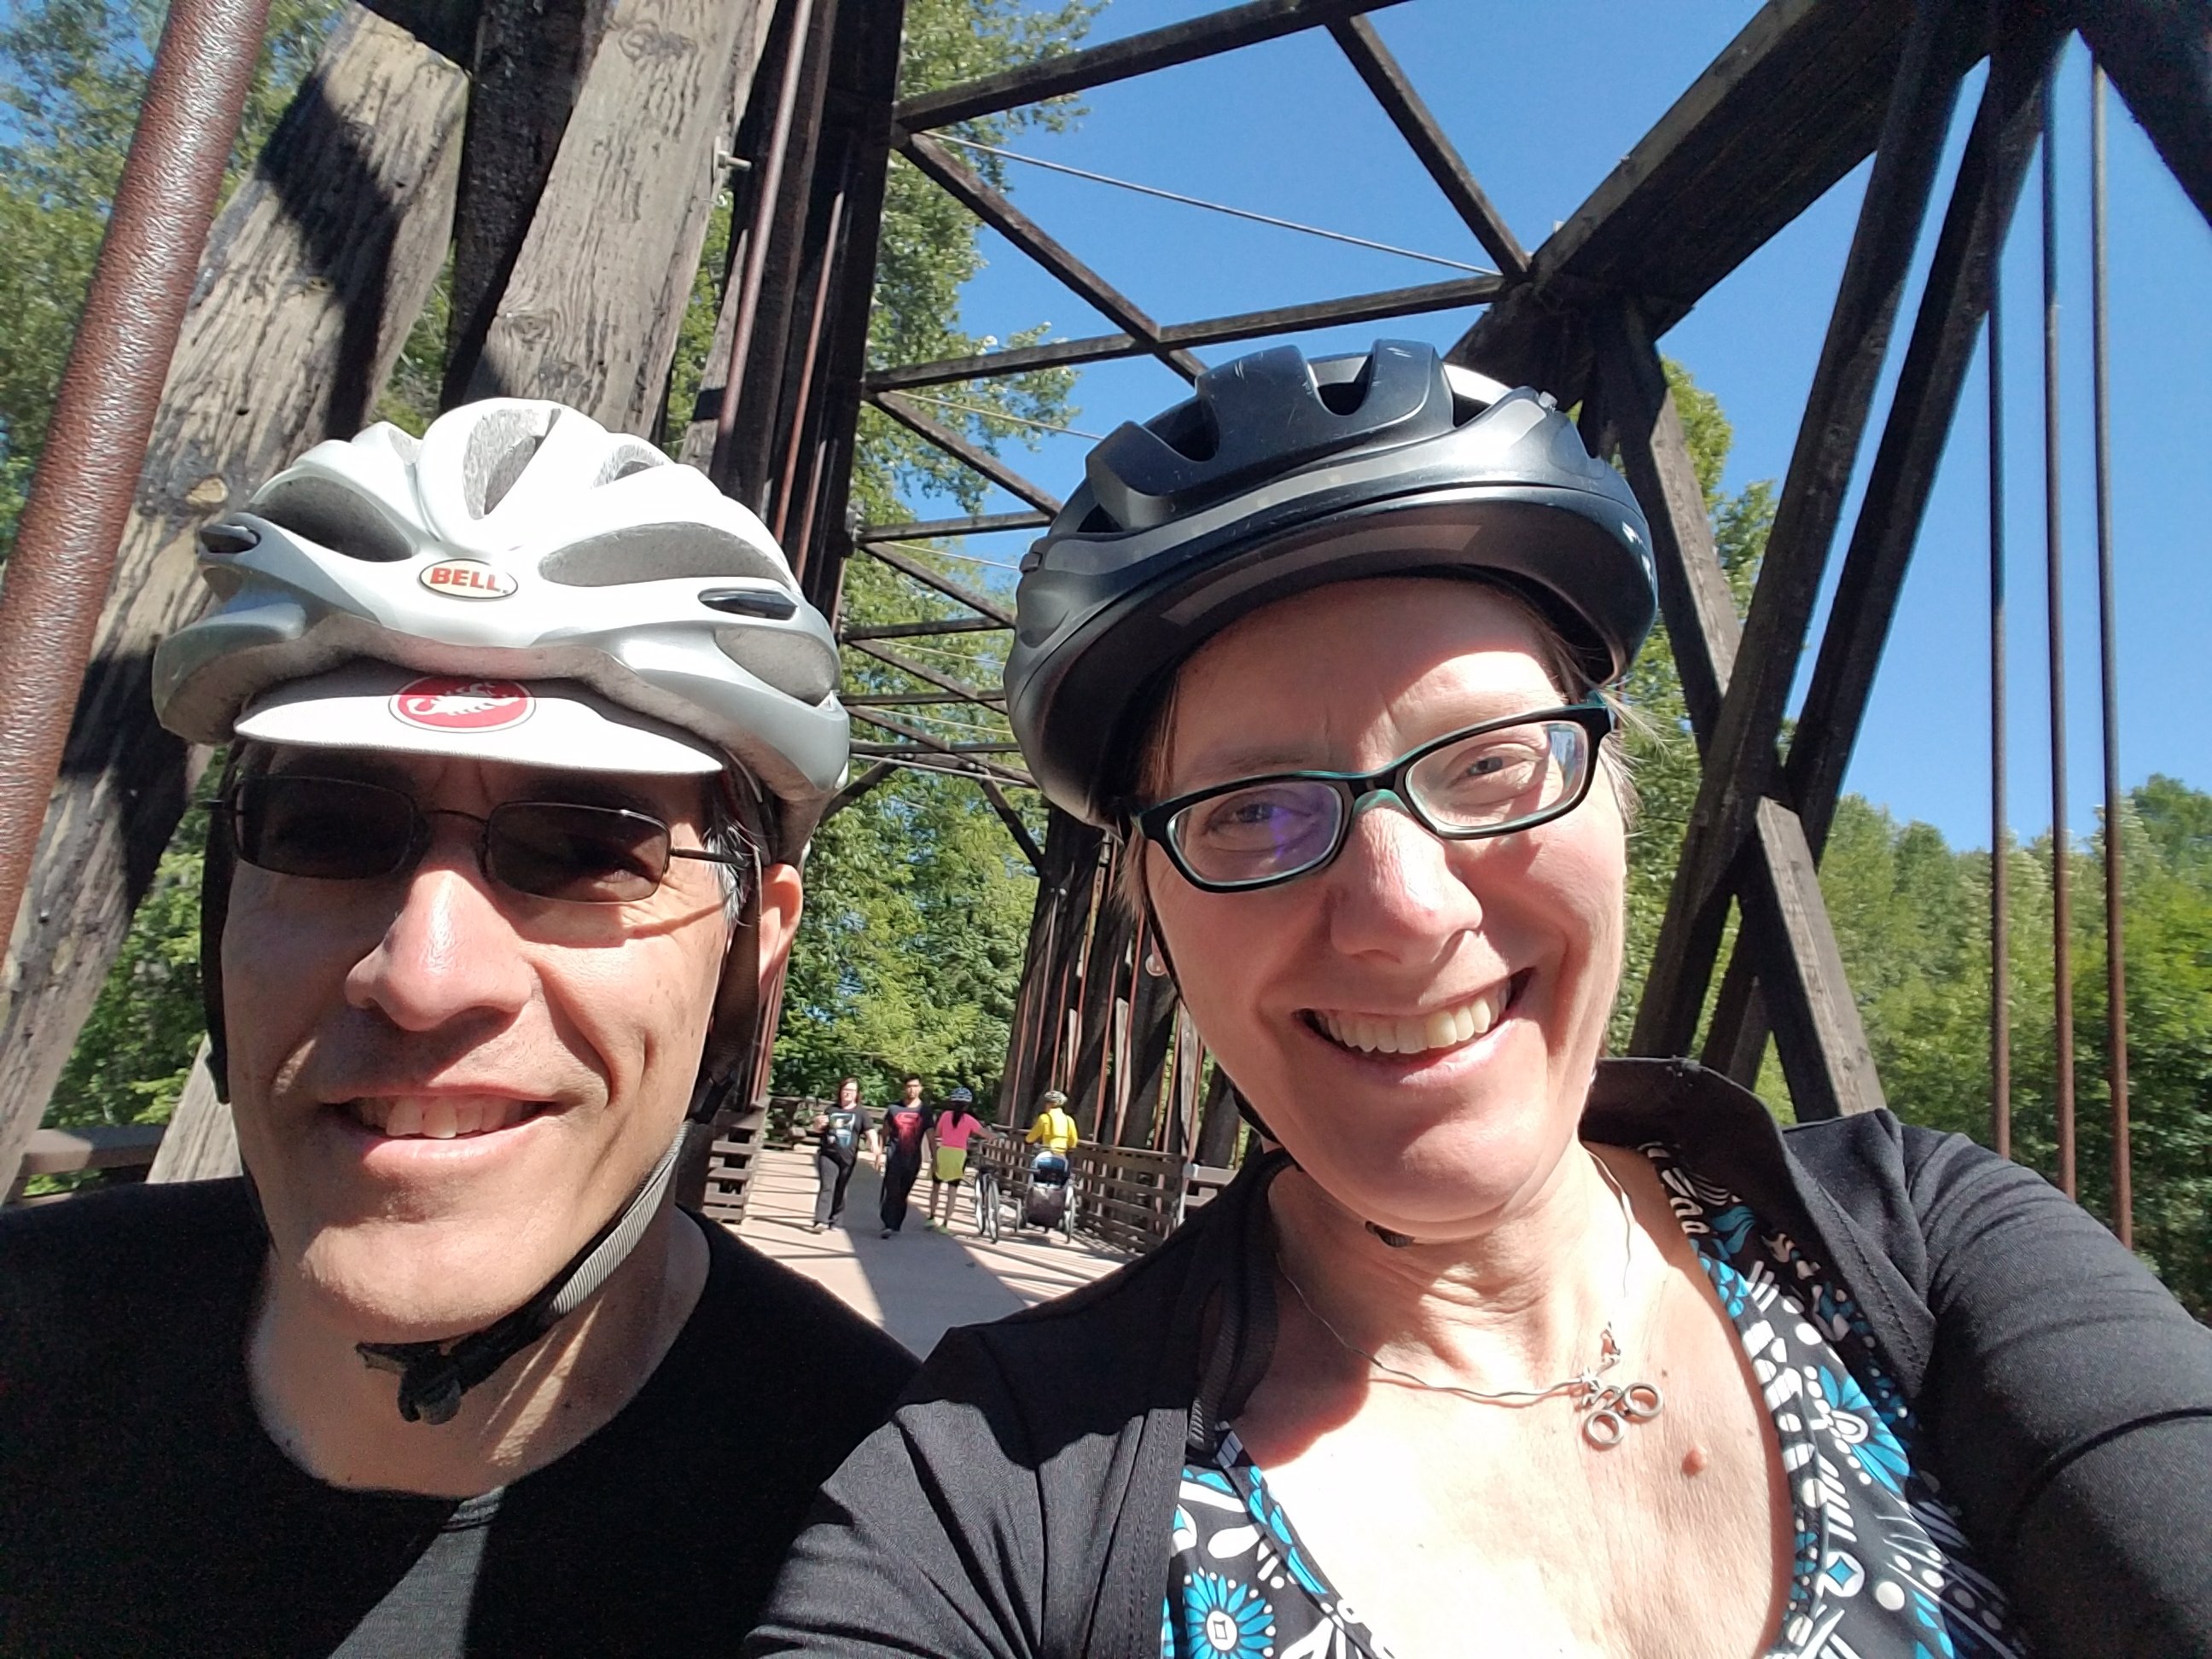 Bike Touring Northwest Washington State: How Our Bike + Ferry + Train Loop Worked Out